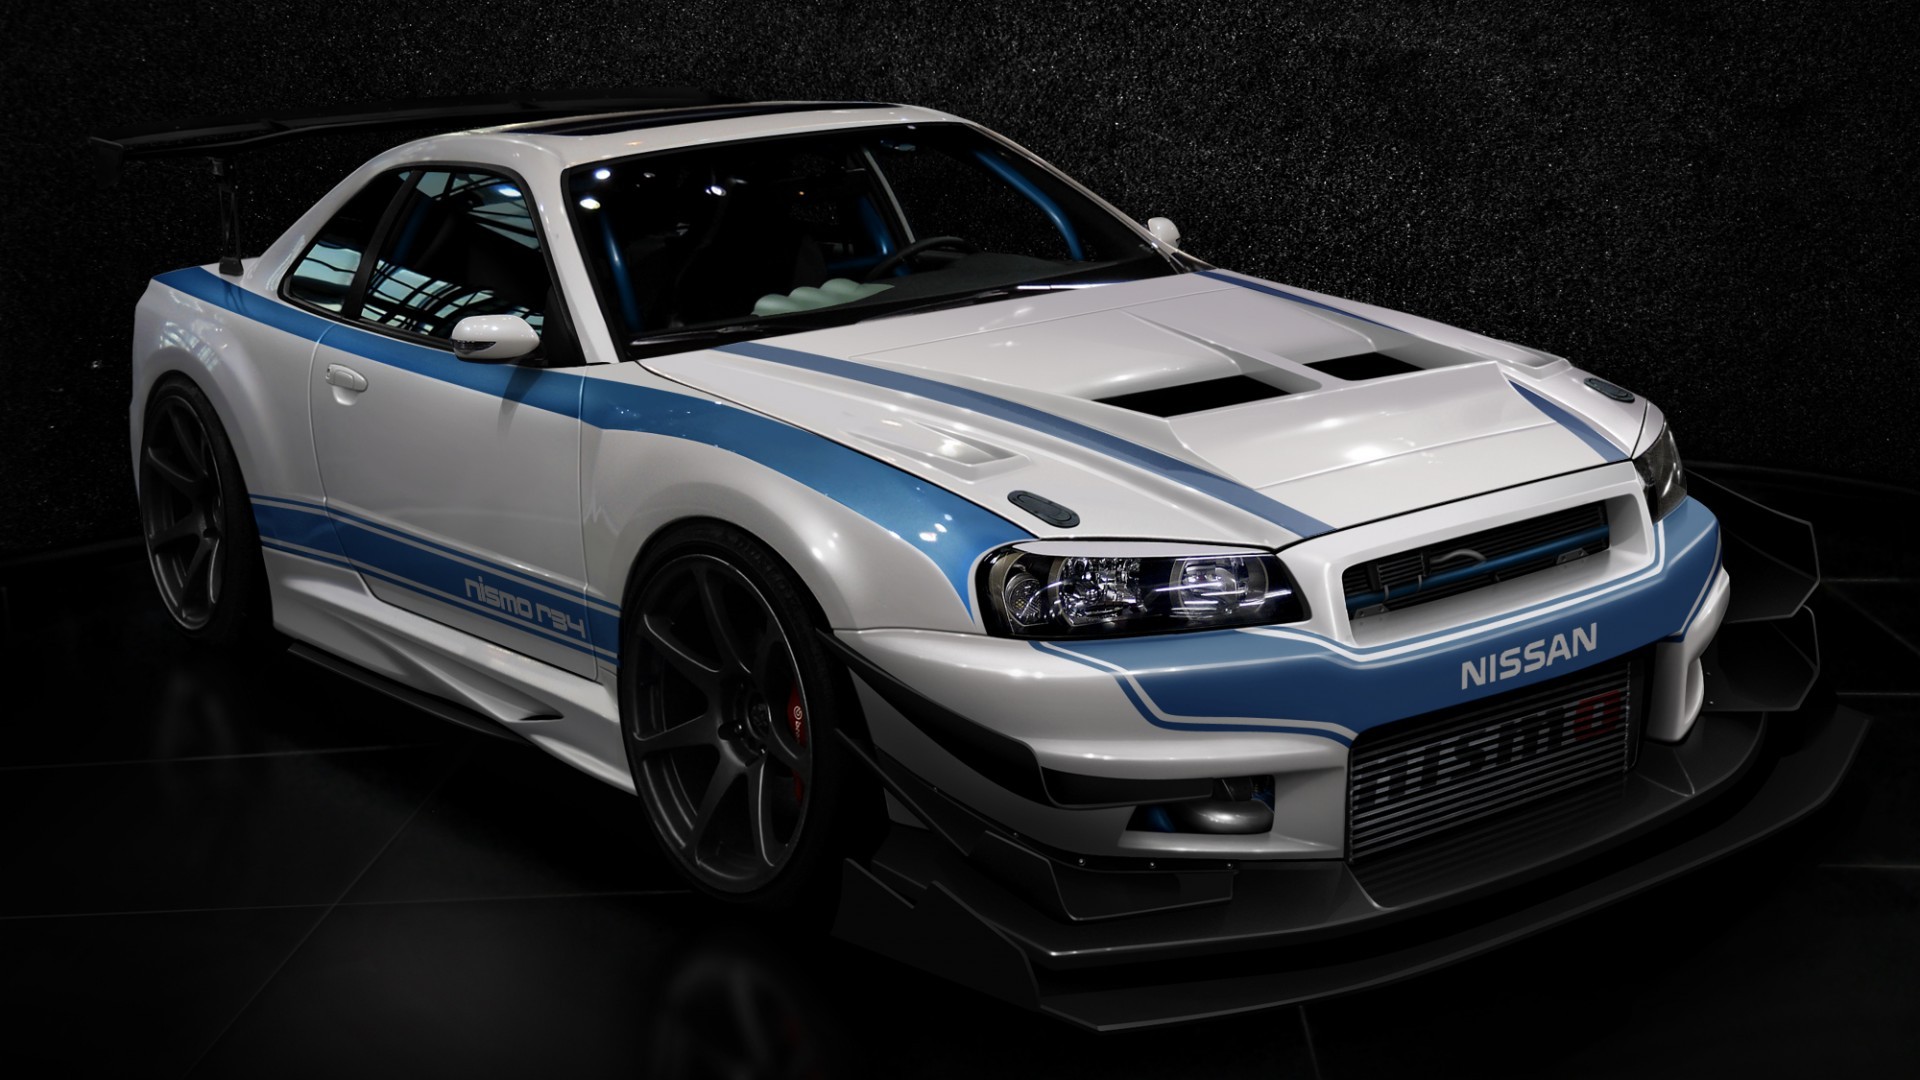 General 1920x1080 car Japanese cars Nissan Skyline R34 Nissan Nismo frontal view